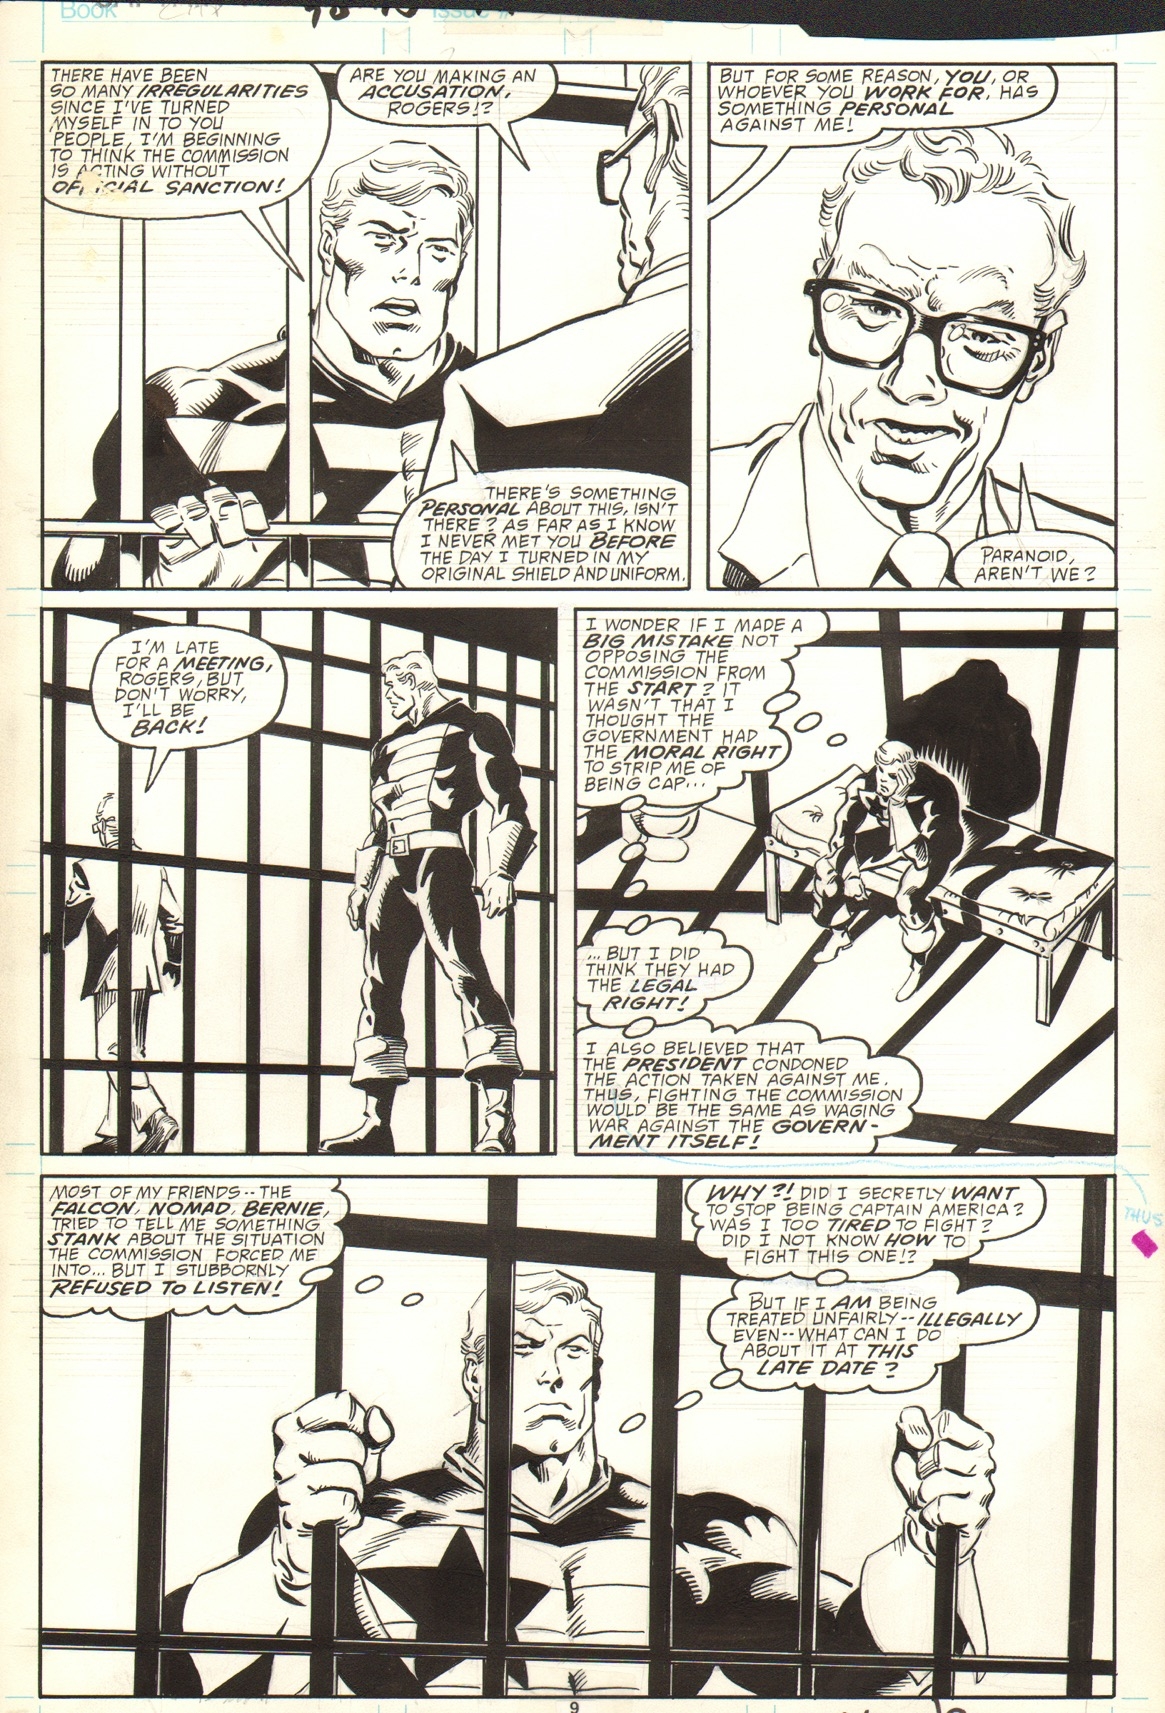 Captain America #347 page 9 The Captain Behind Bars by Kieron Dwyer and Al  Milgrom (1988), in Rick Verbanas's Captain America Original Art - Published  Comic Art Gallery Room